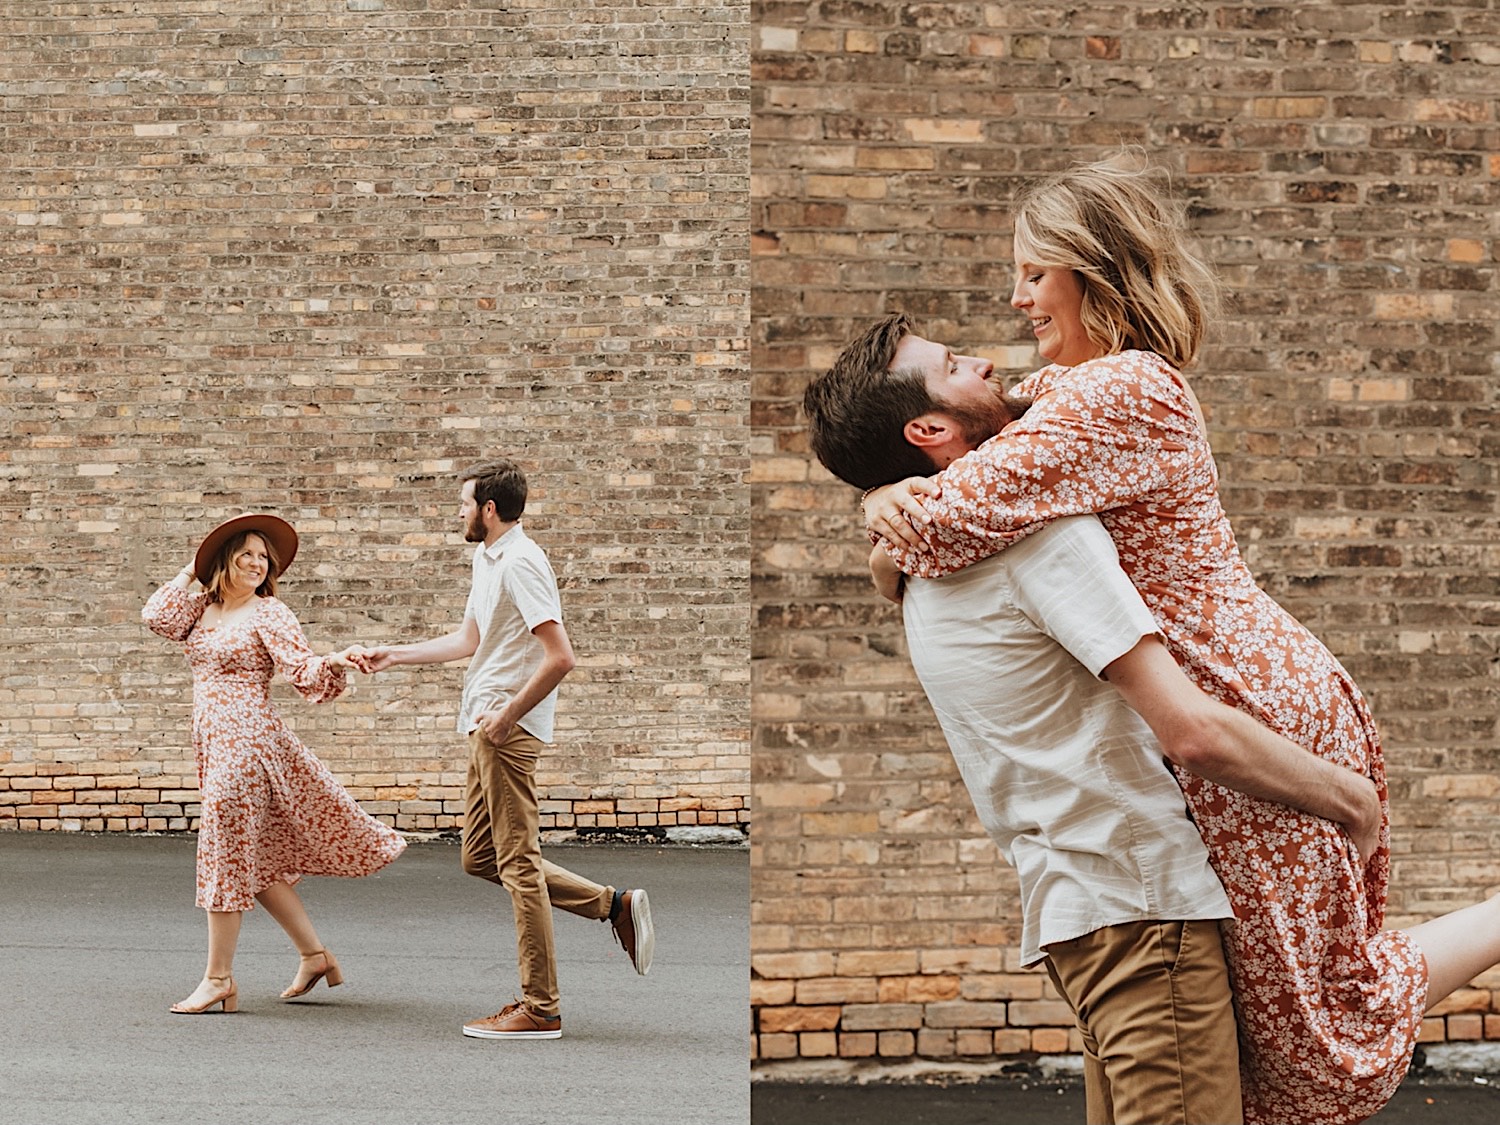 2 photos side by side of a couple in front of a brick wall, the left is of them walking together as the woman looks back at the man, the right is of the man lifting the woman in the air as they smile at each other